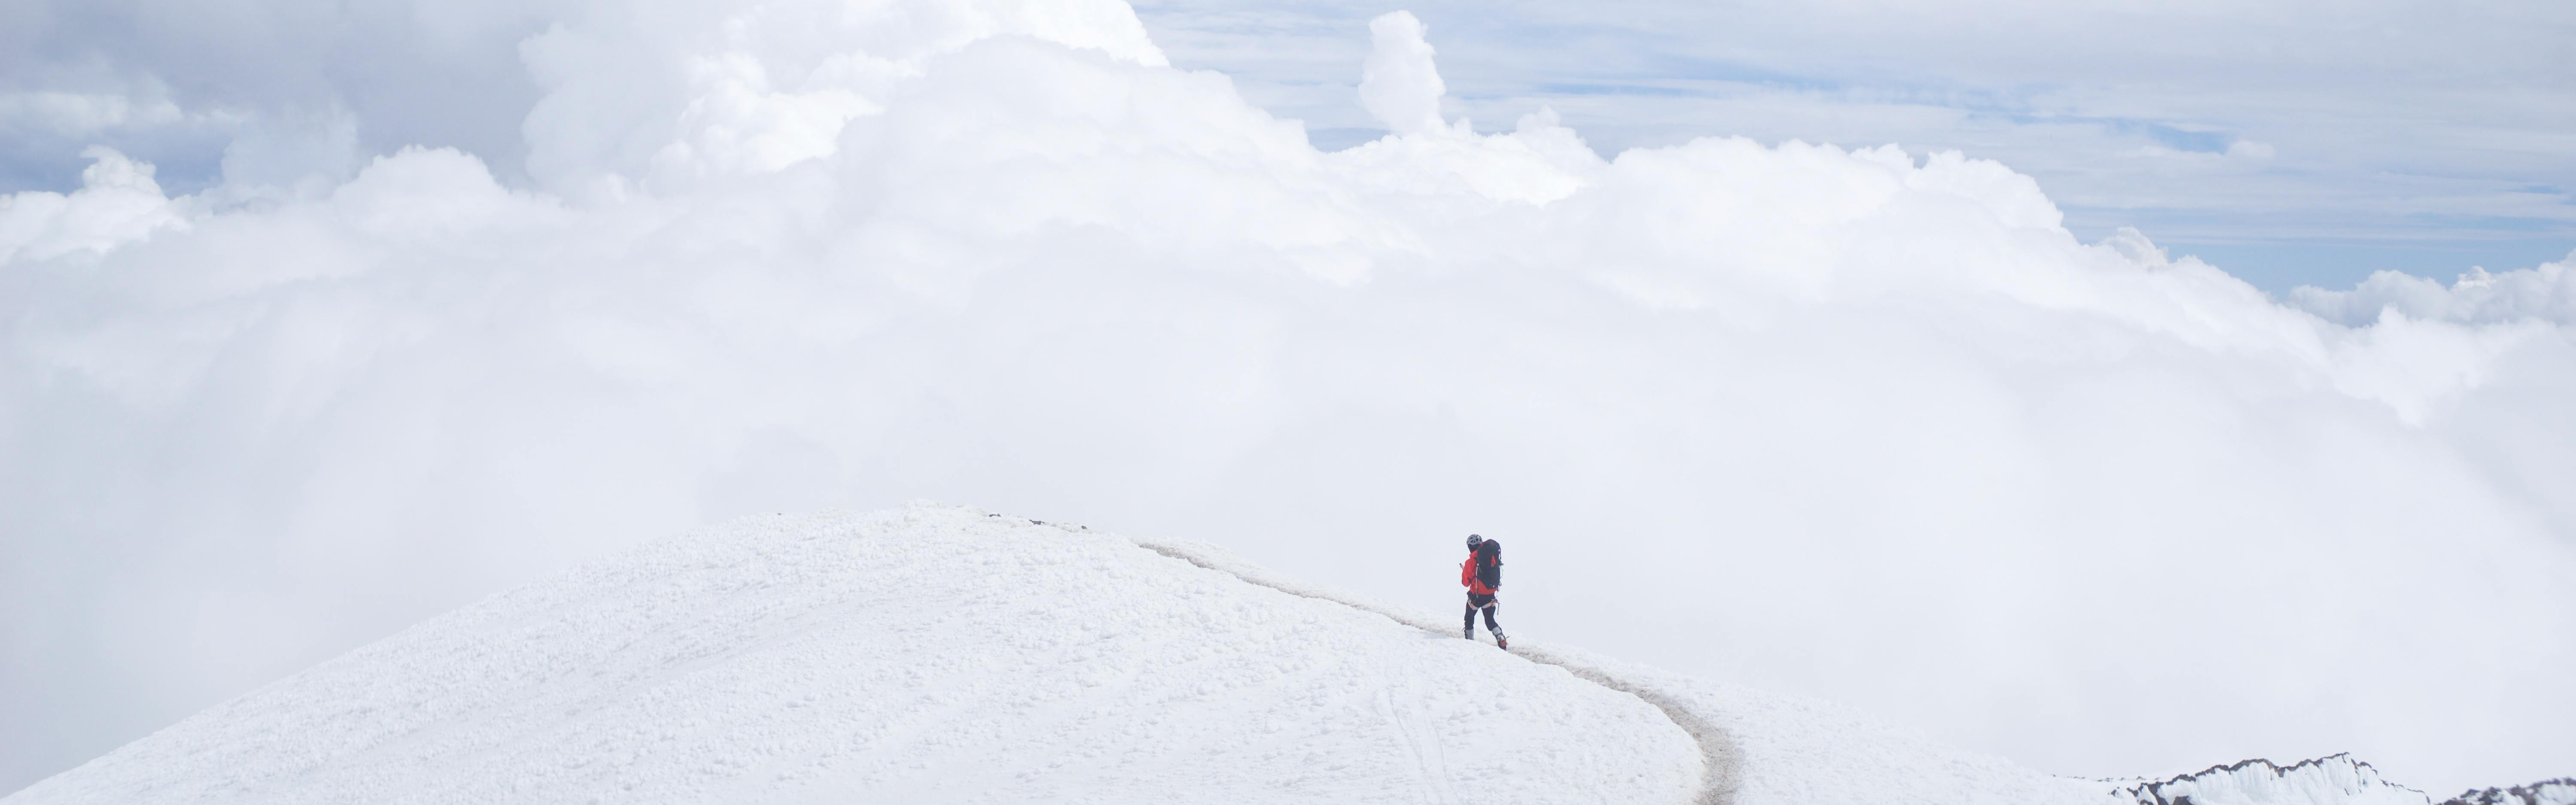 Someone walks across a snowy expanse with clouds or fog rising in the background so it's not clear where the landscape ends and the sky begins.